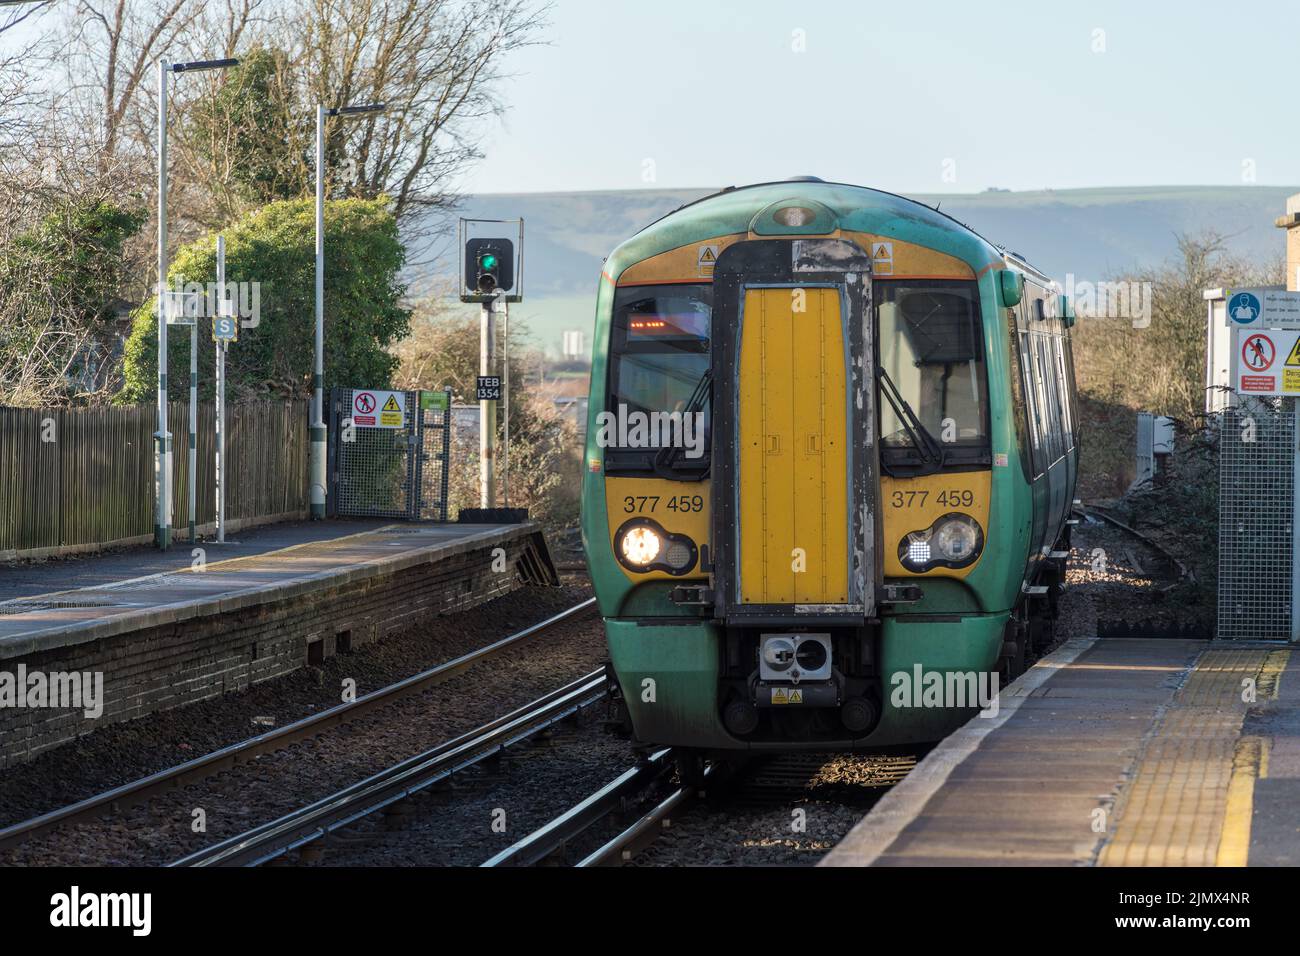 GLYNDE, EAST SUSSEX, UK - JANUARY 12 : Train passing through the station in Glynde, East Sussex, UK on January 12, 2022 Stock Photo